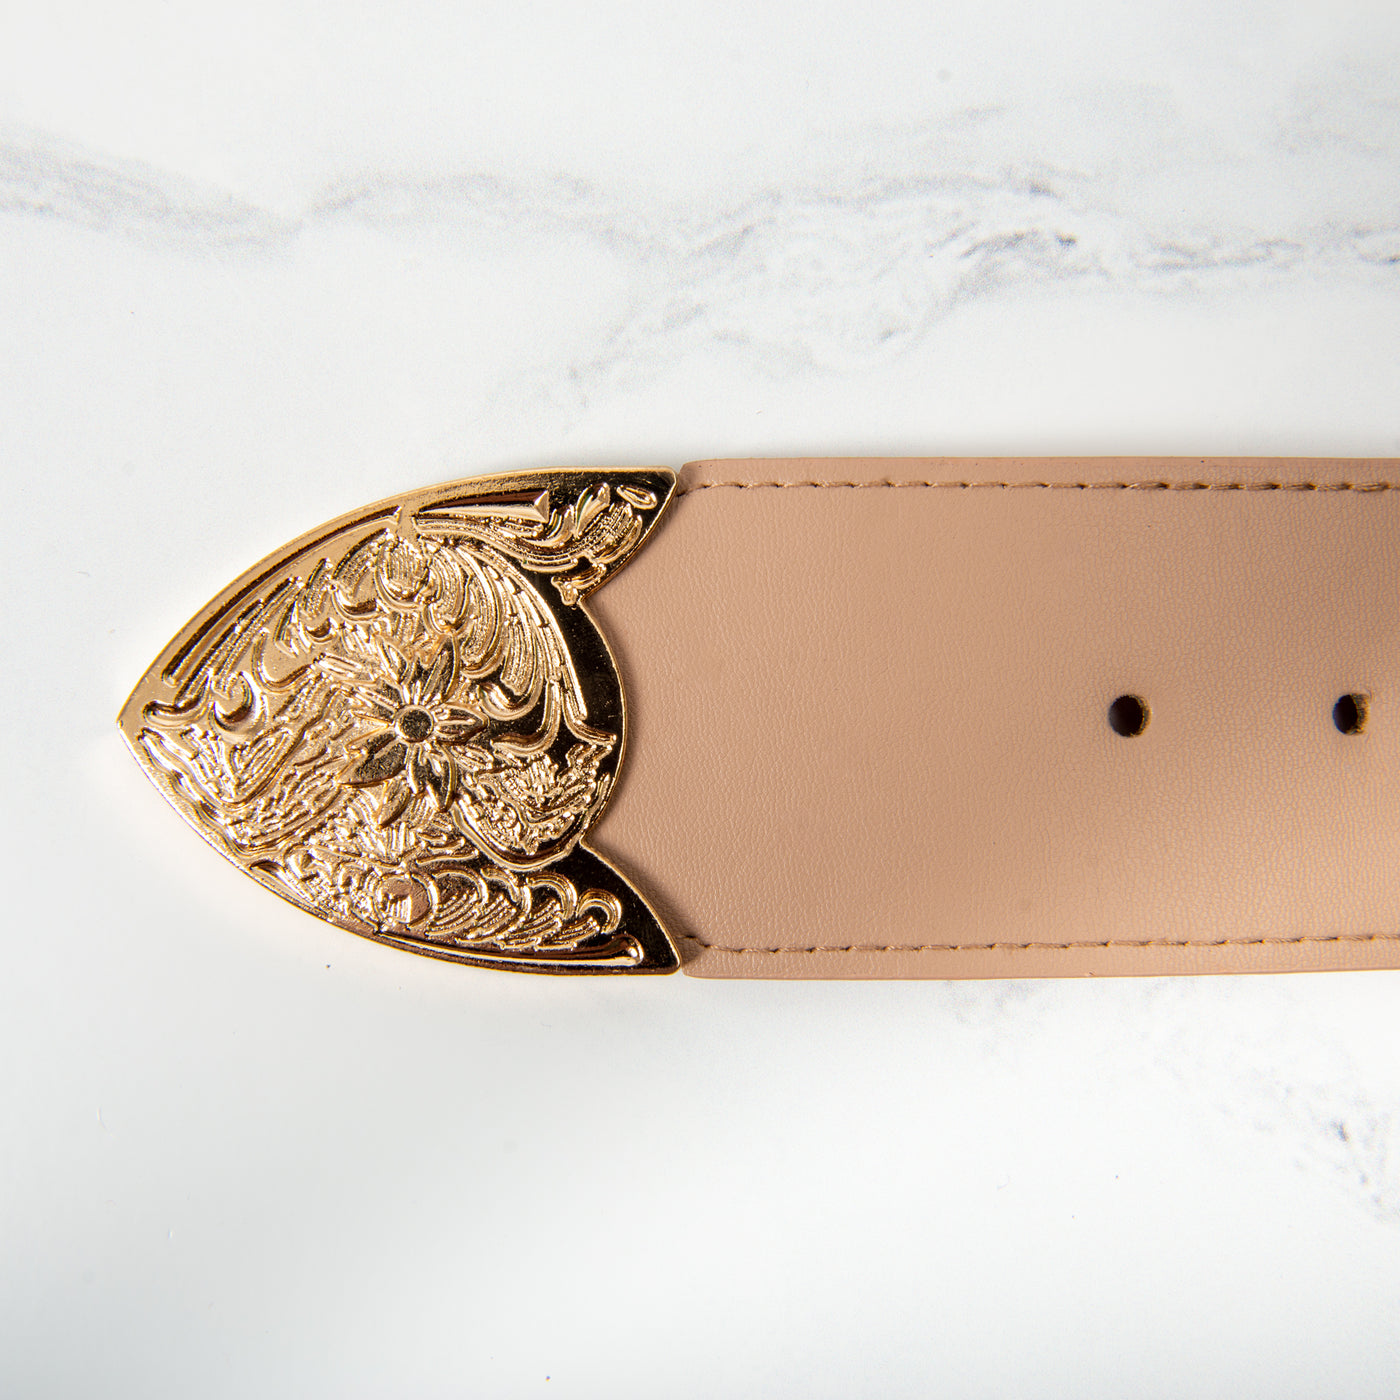 Statement Brown Leather Belt with Striking Gold Buckle | Vegan Leather and Elastic